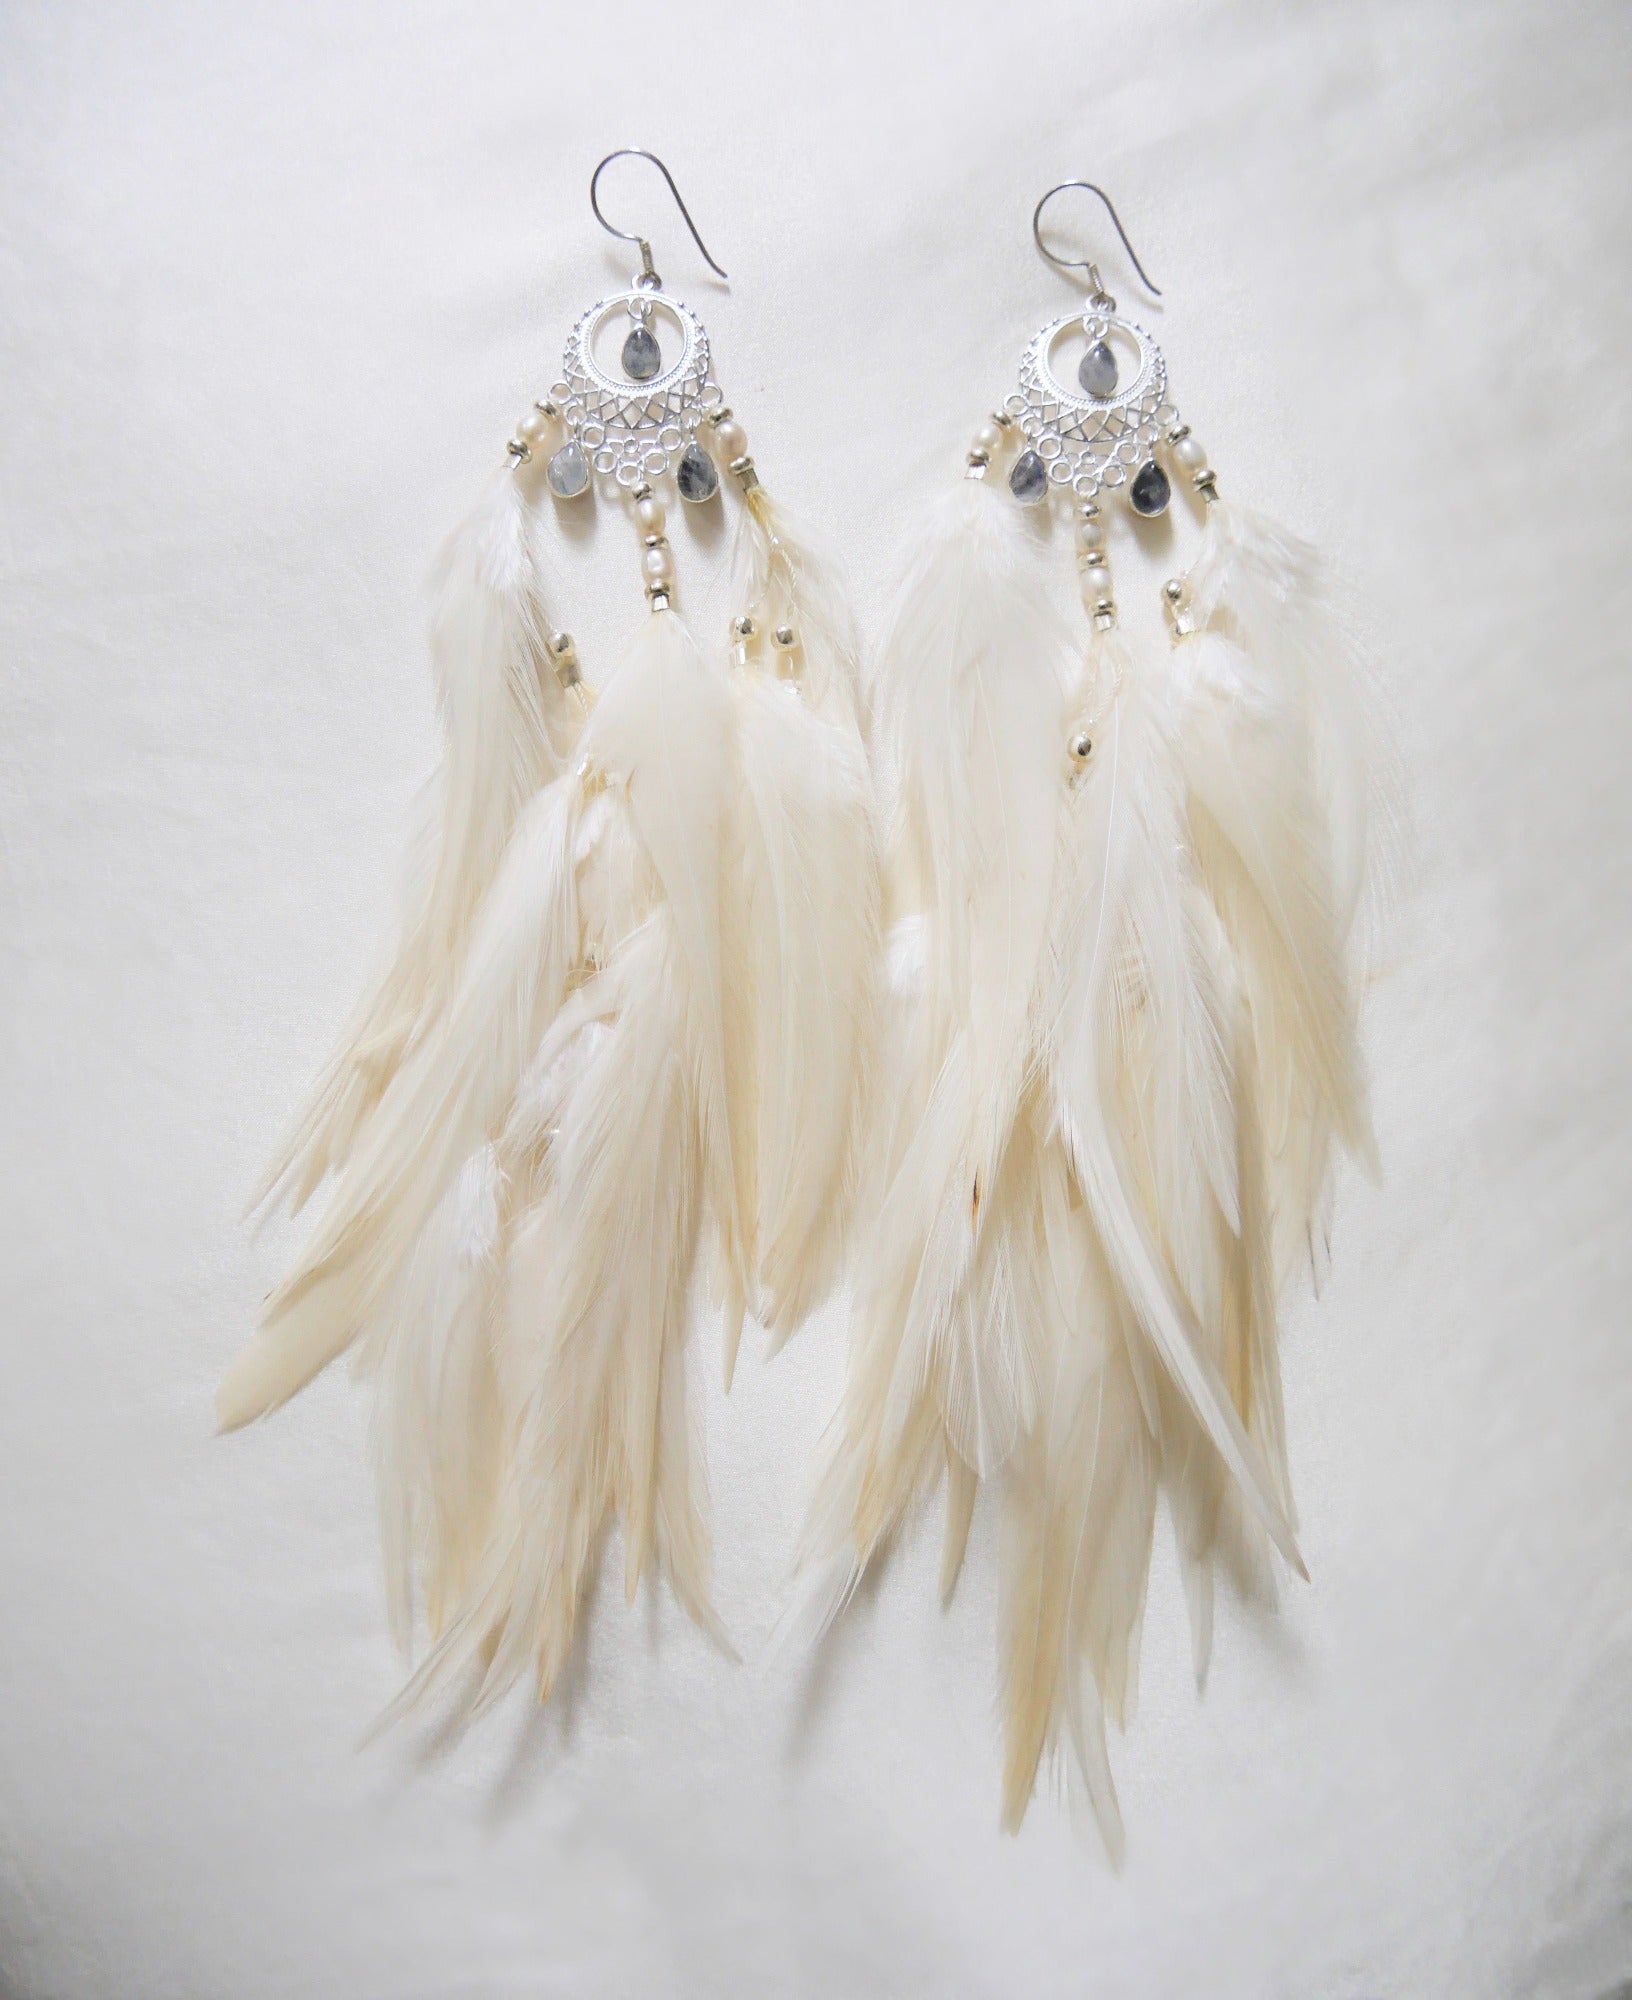 Bohemian Goddess crystal earrings named My Feminine Essence with Rainbow Moonstones and white feathers 